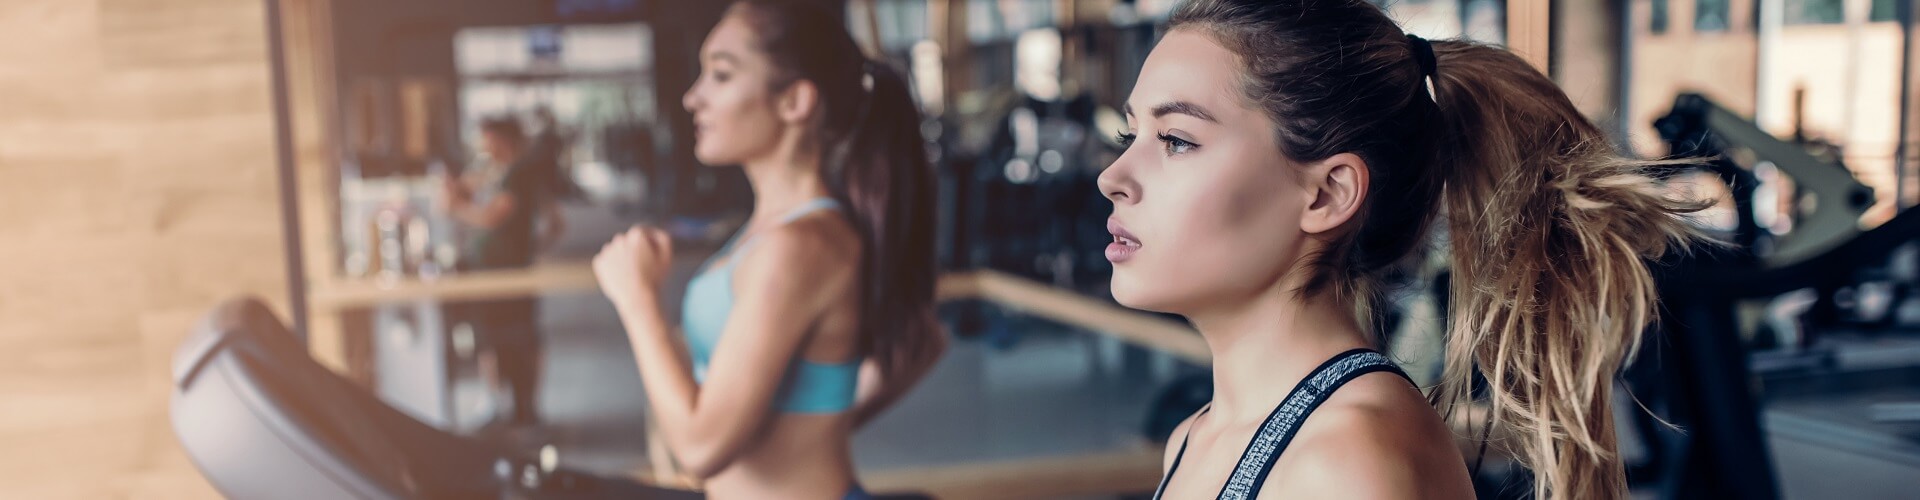 Side view of two attractive sports women on running track. Girls on treadmill